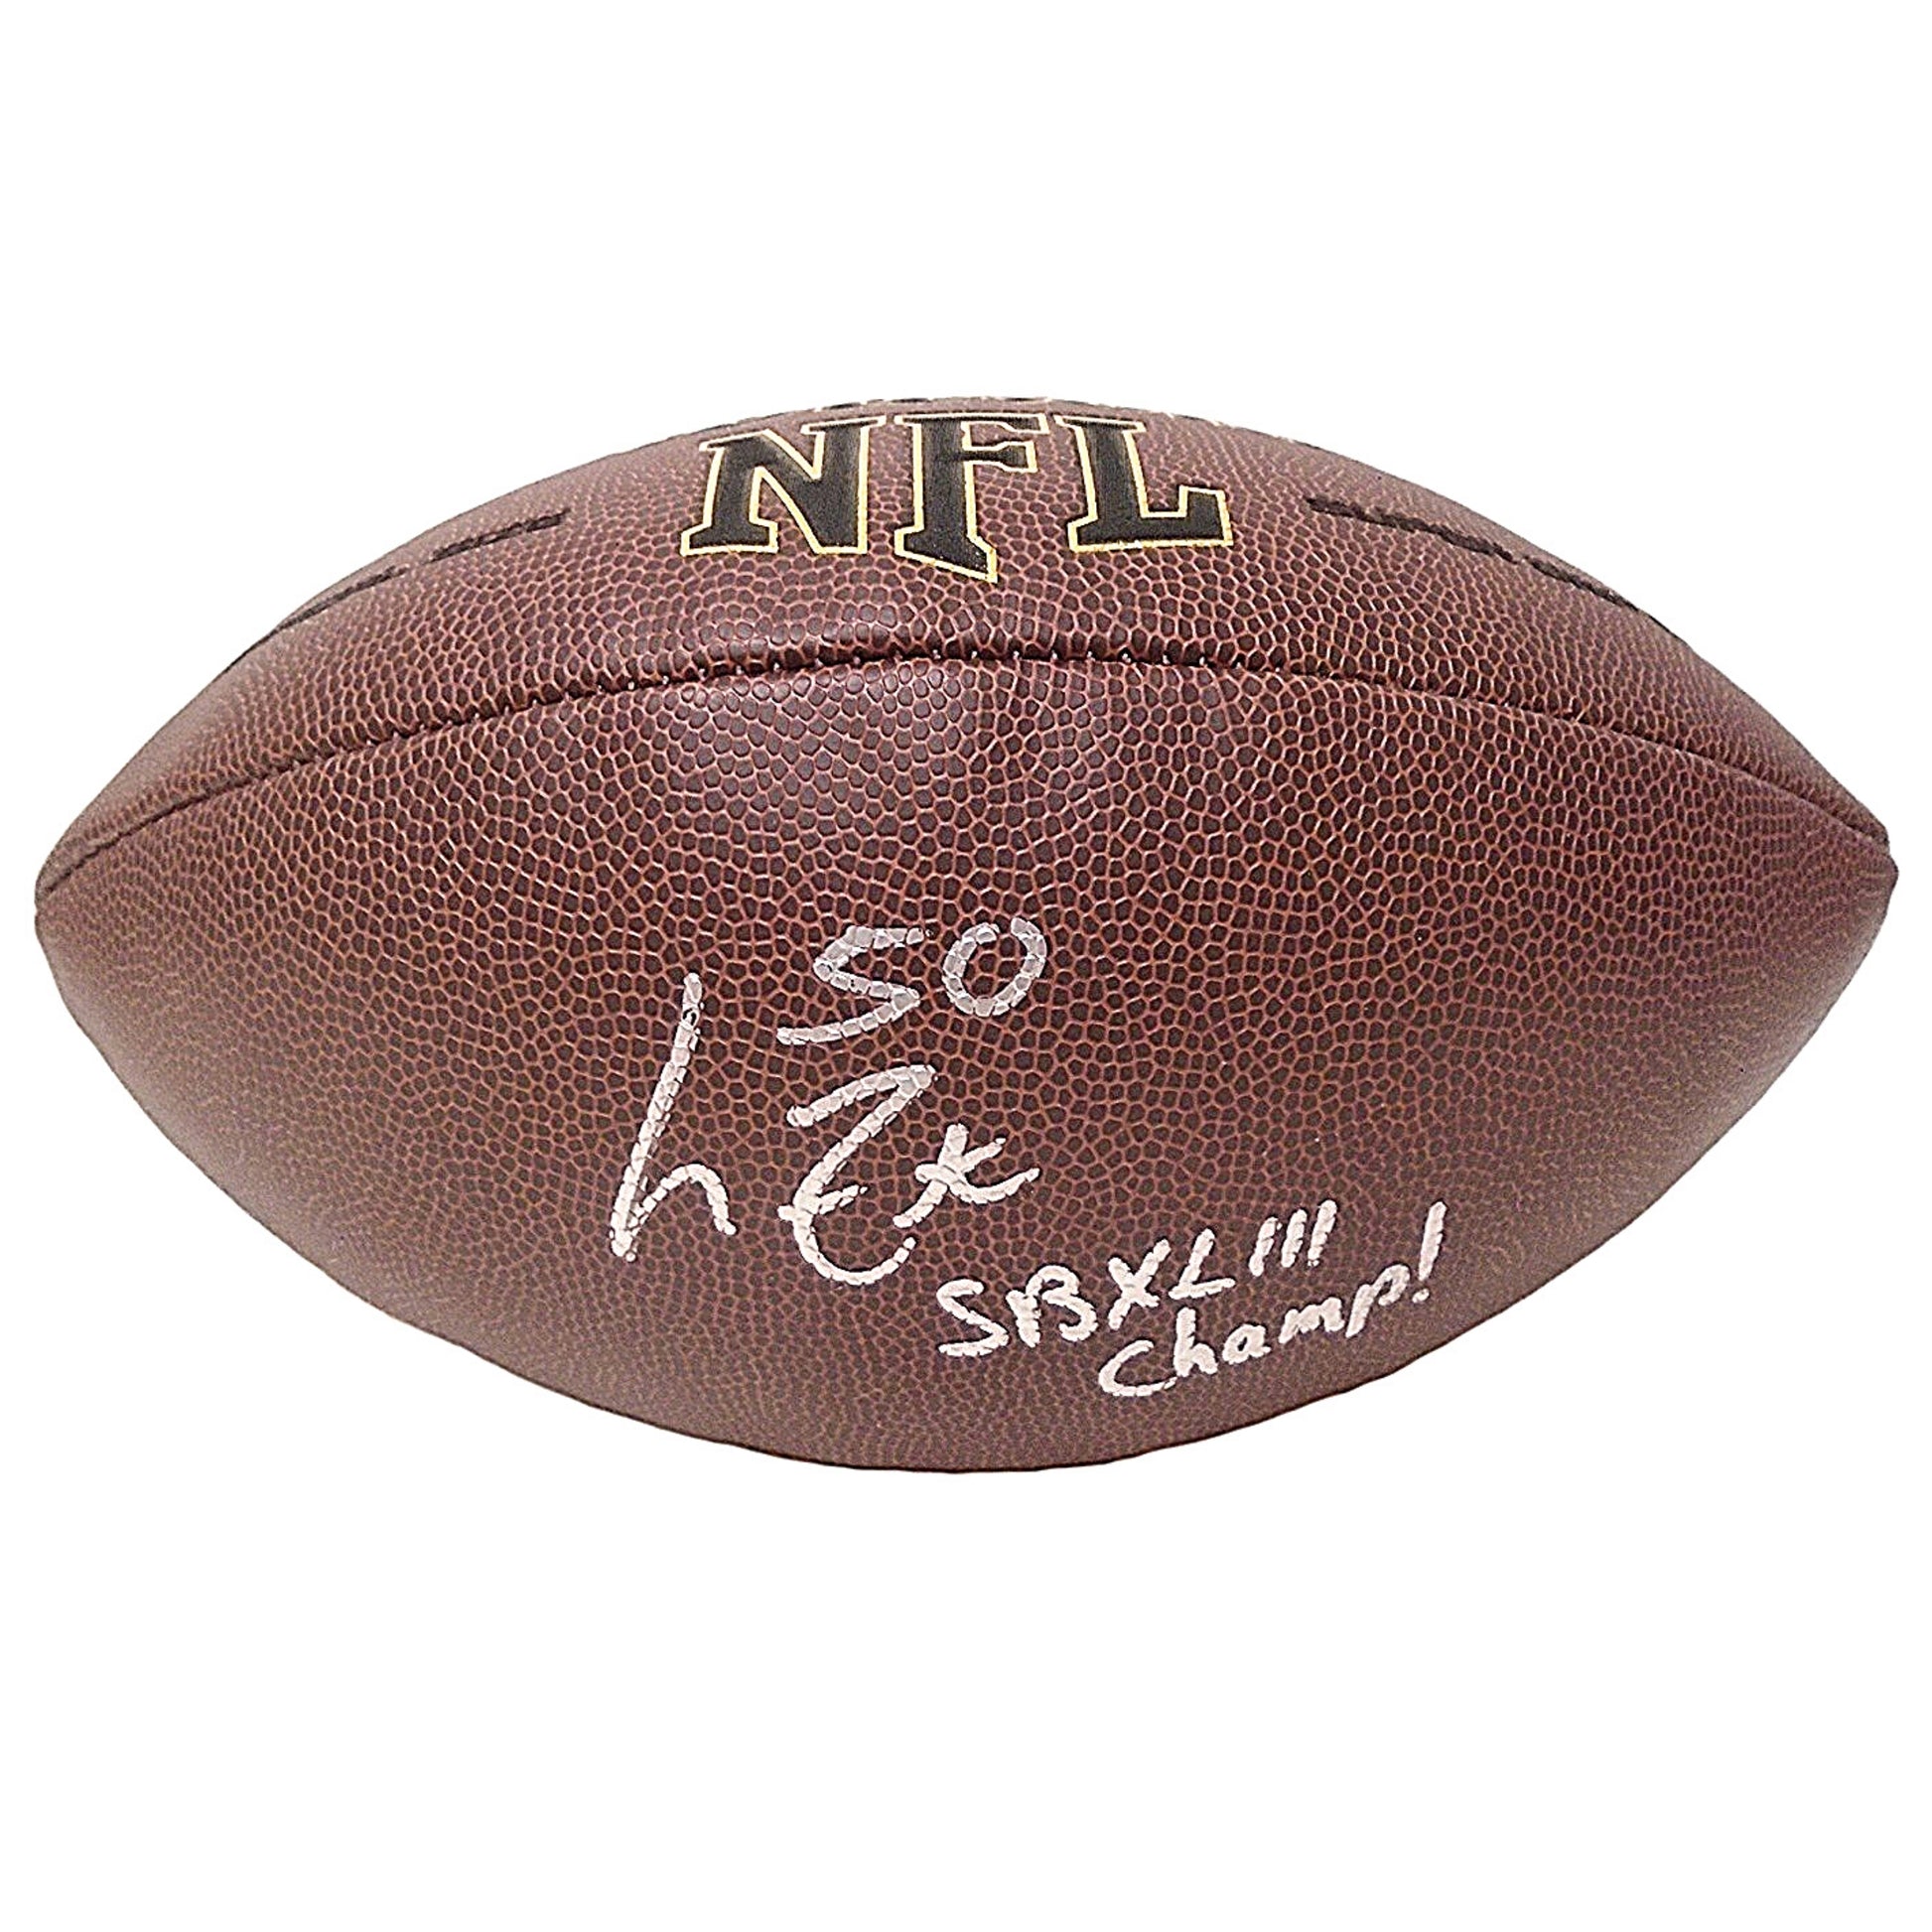 Antonio Brown Signed The Duke Official NFL Game Football (JSA)